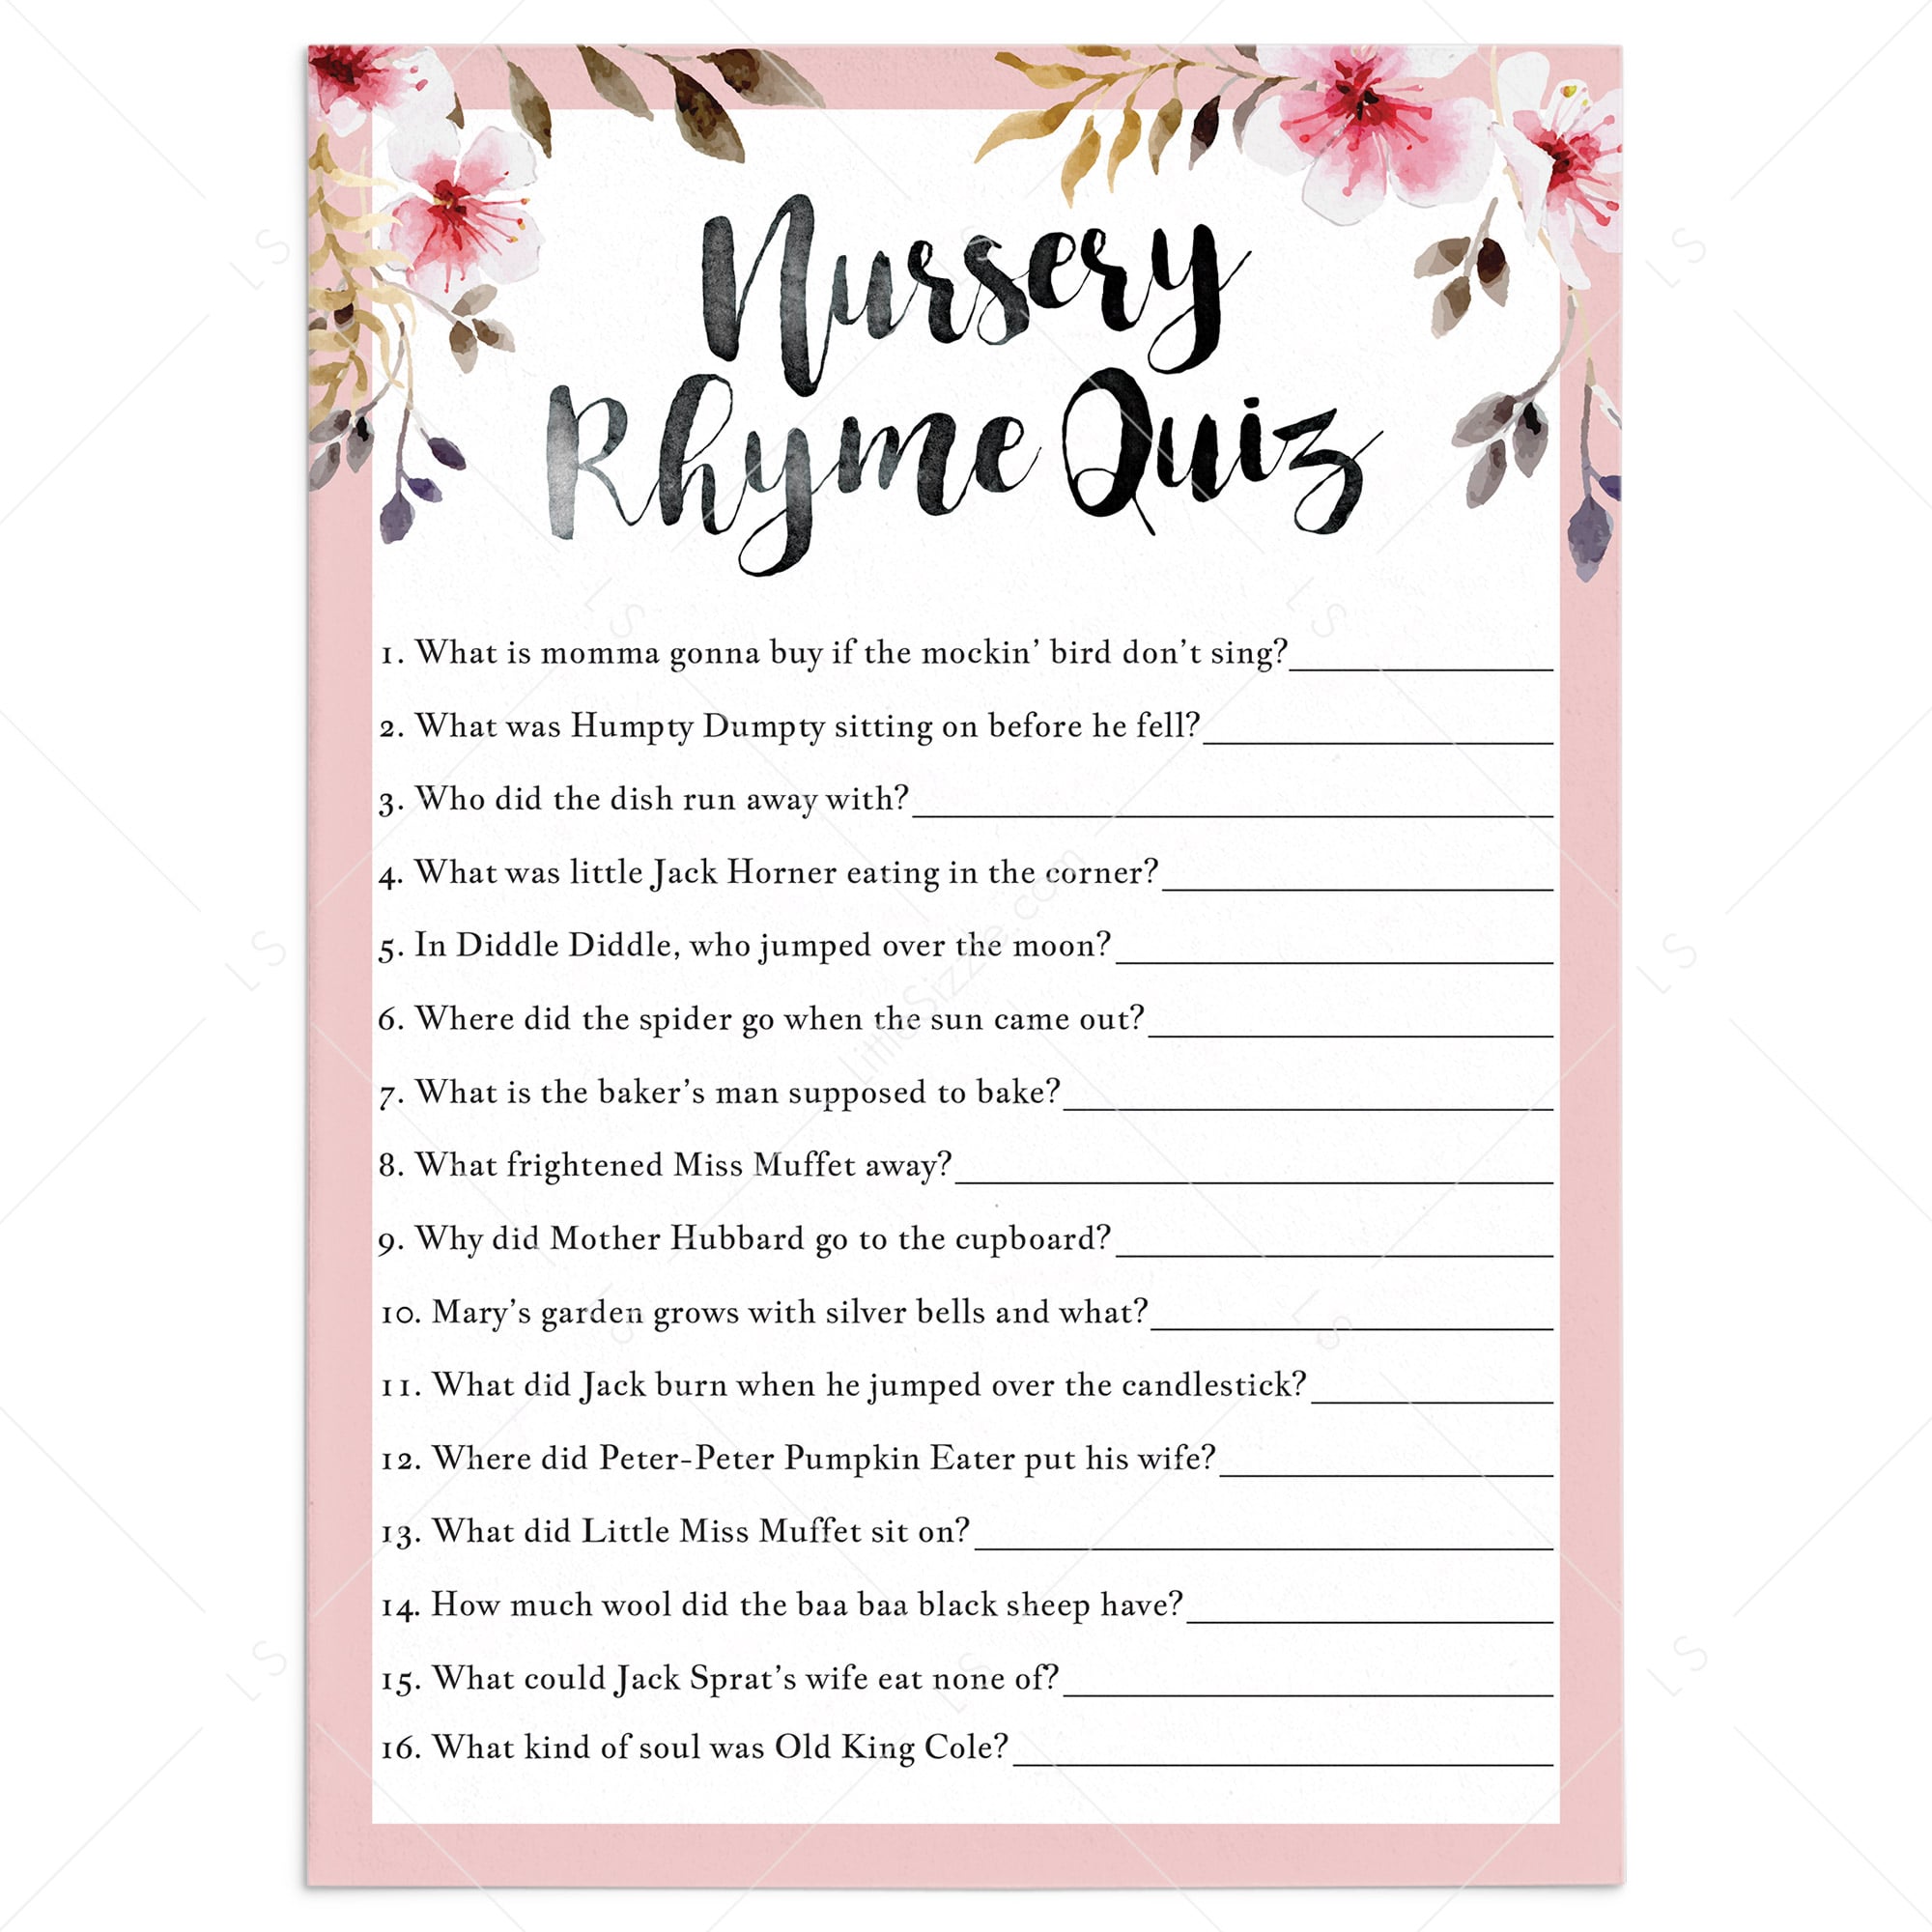 Pink floral nursery rhyme quiz for girl babyshower by LittleSizzle